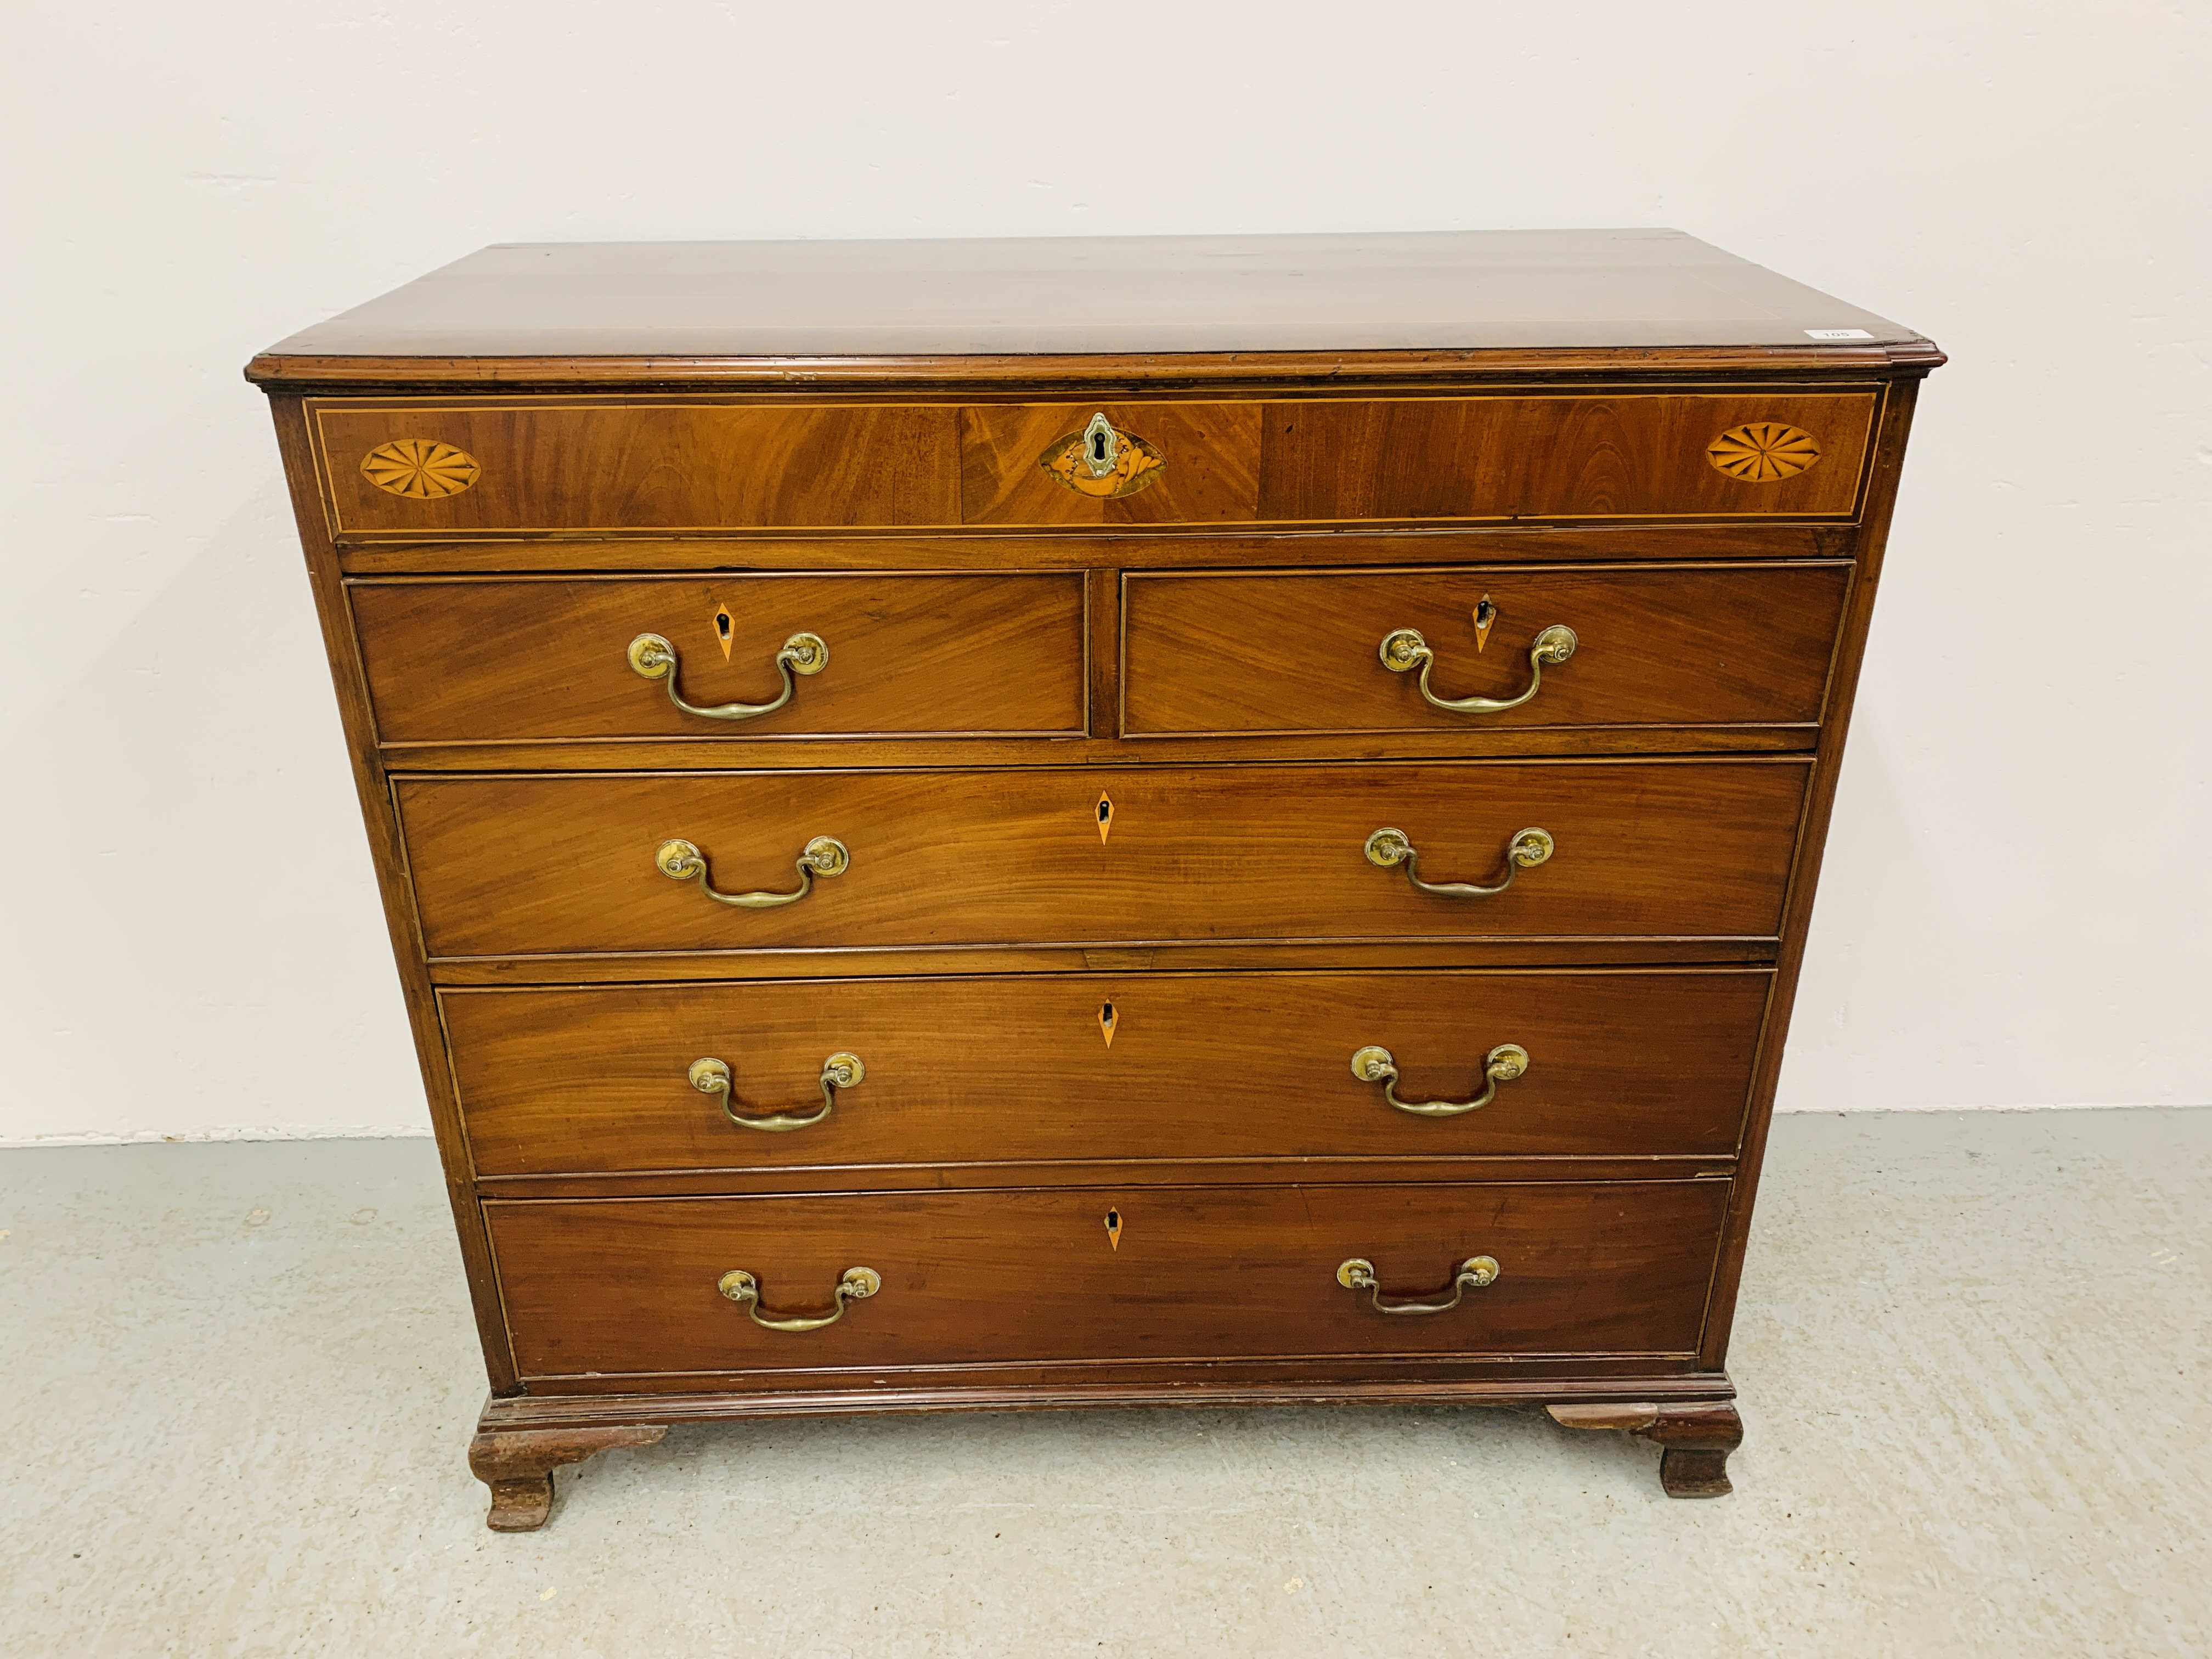 AN EARLY C19TH MAHOGANY SIX DRAWER CHEST, WIDTH 107CM.